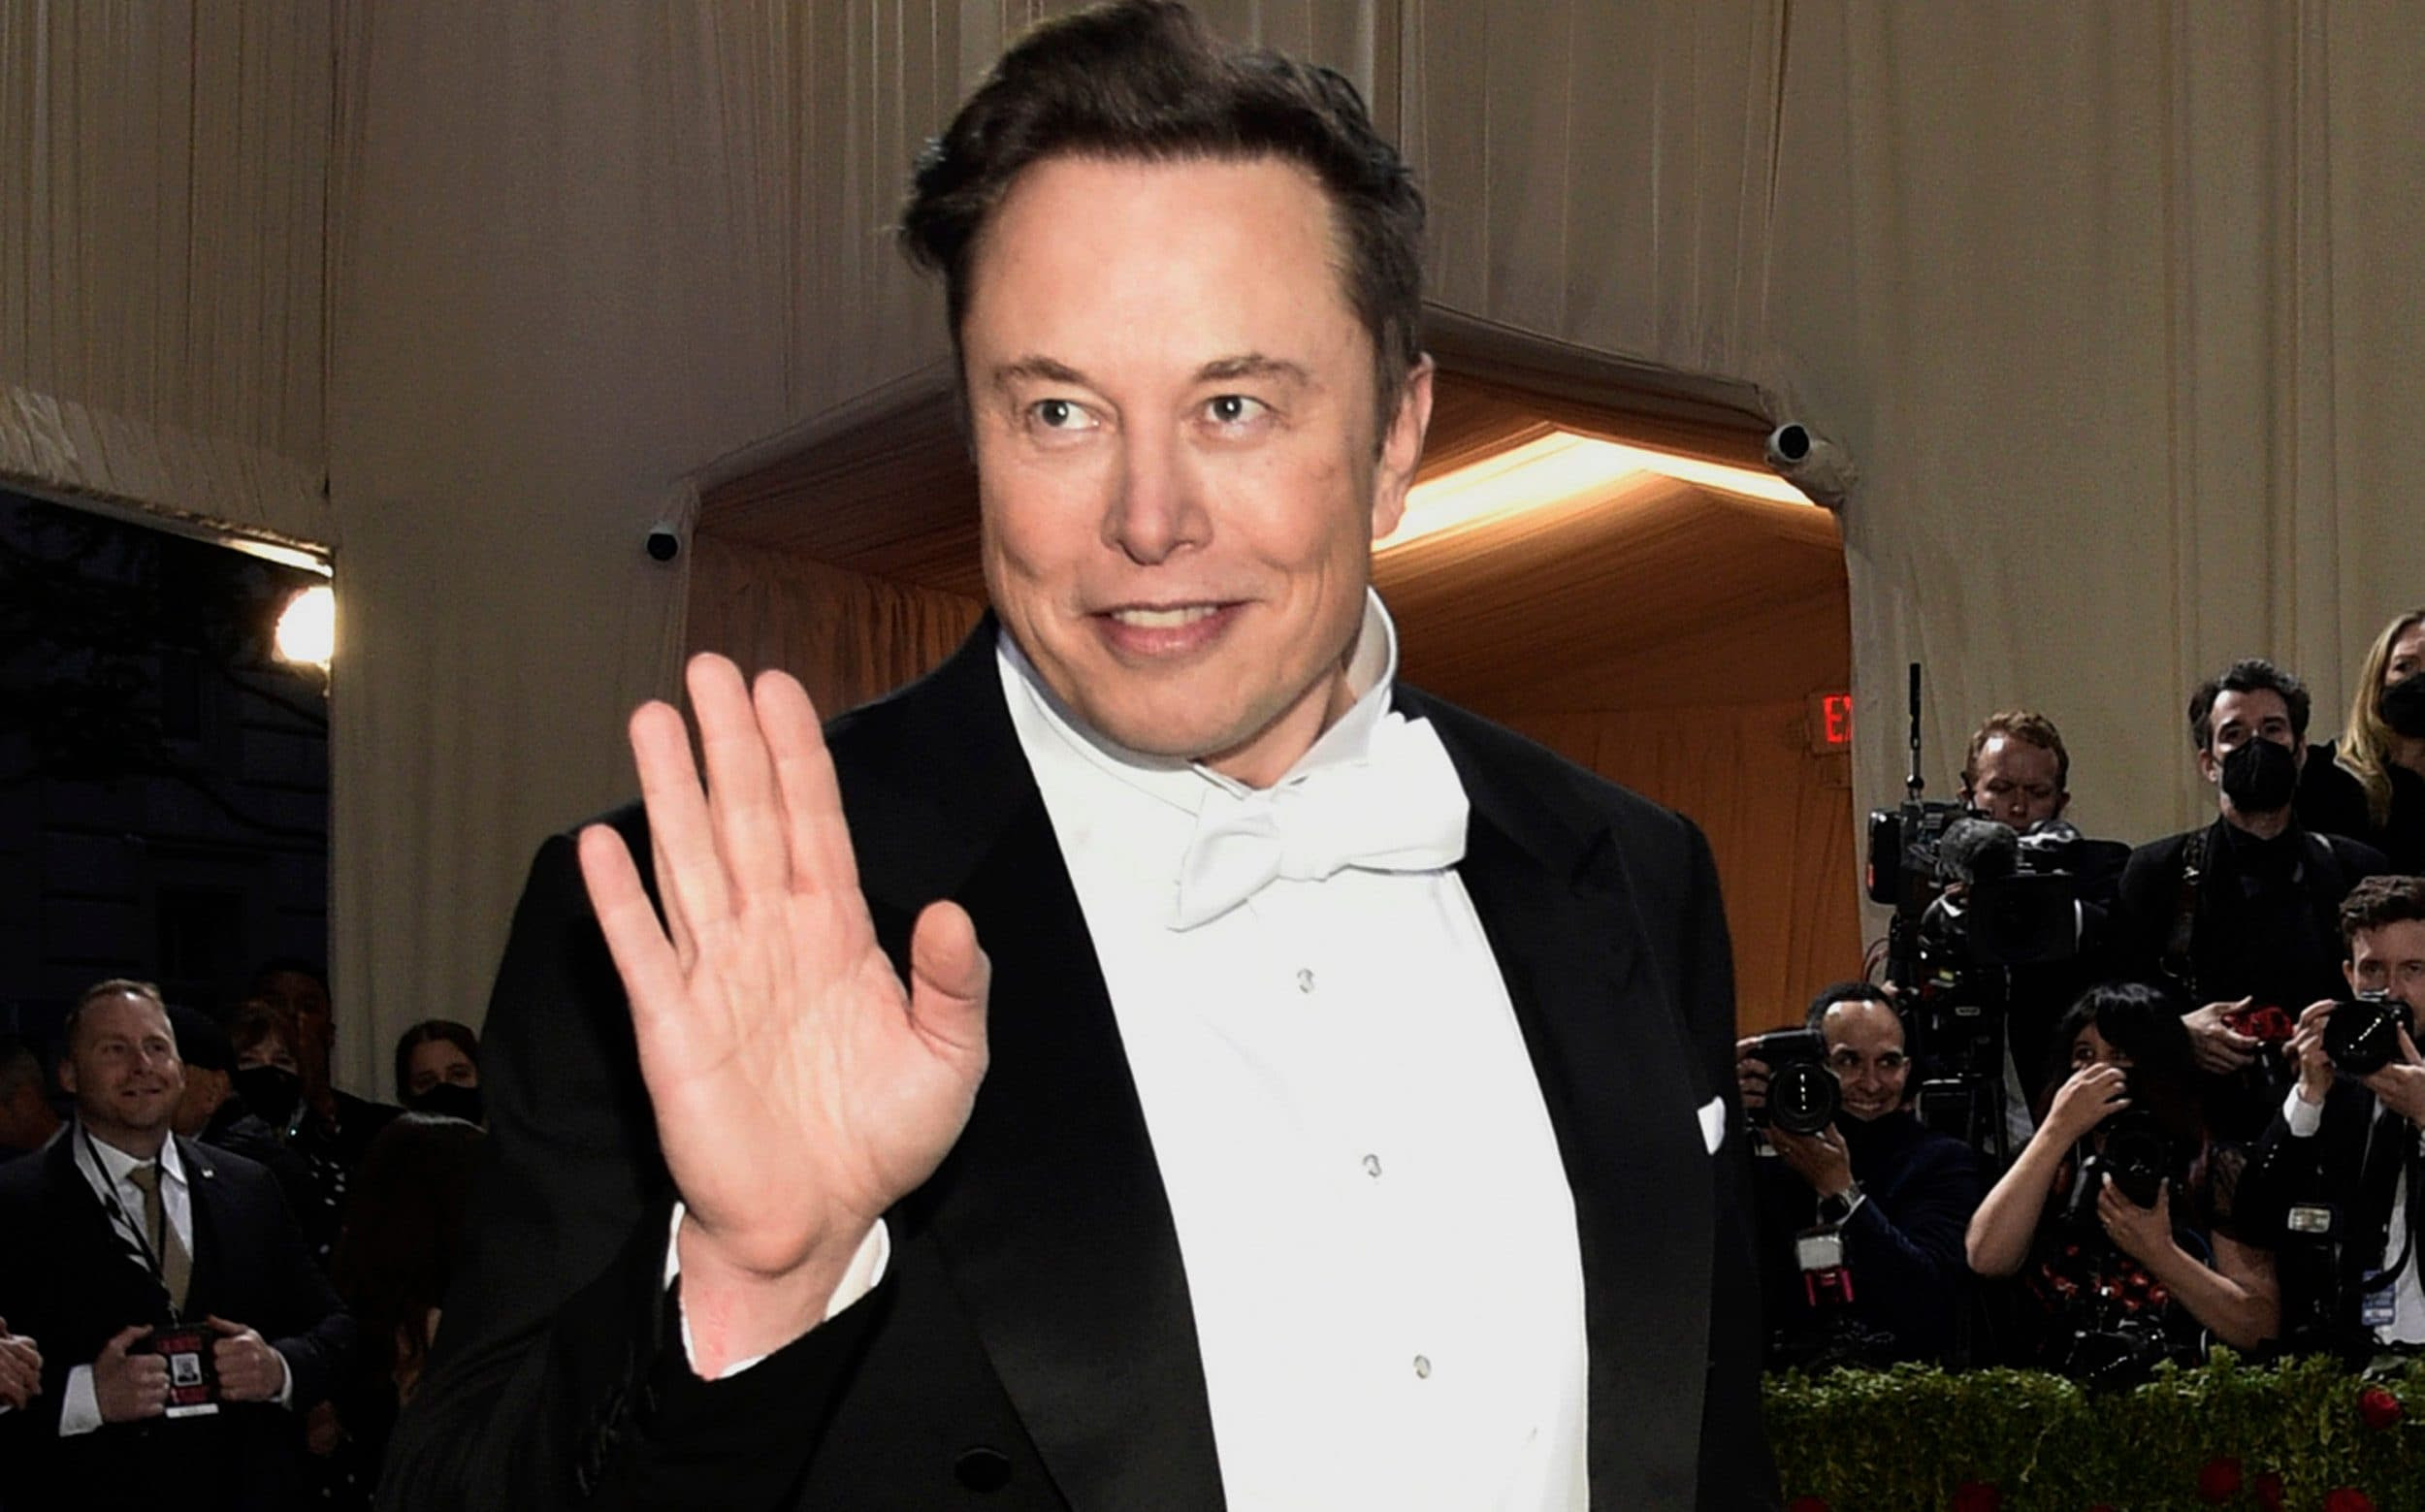 Britain must hold its nose and roll out the red carpet for Elon Musk